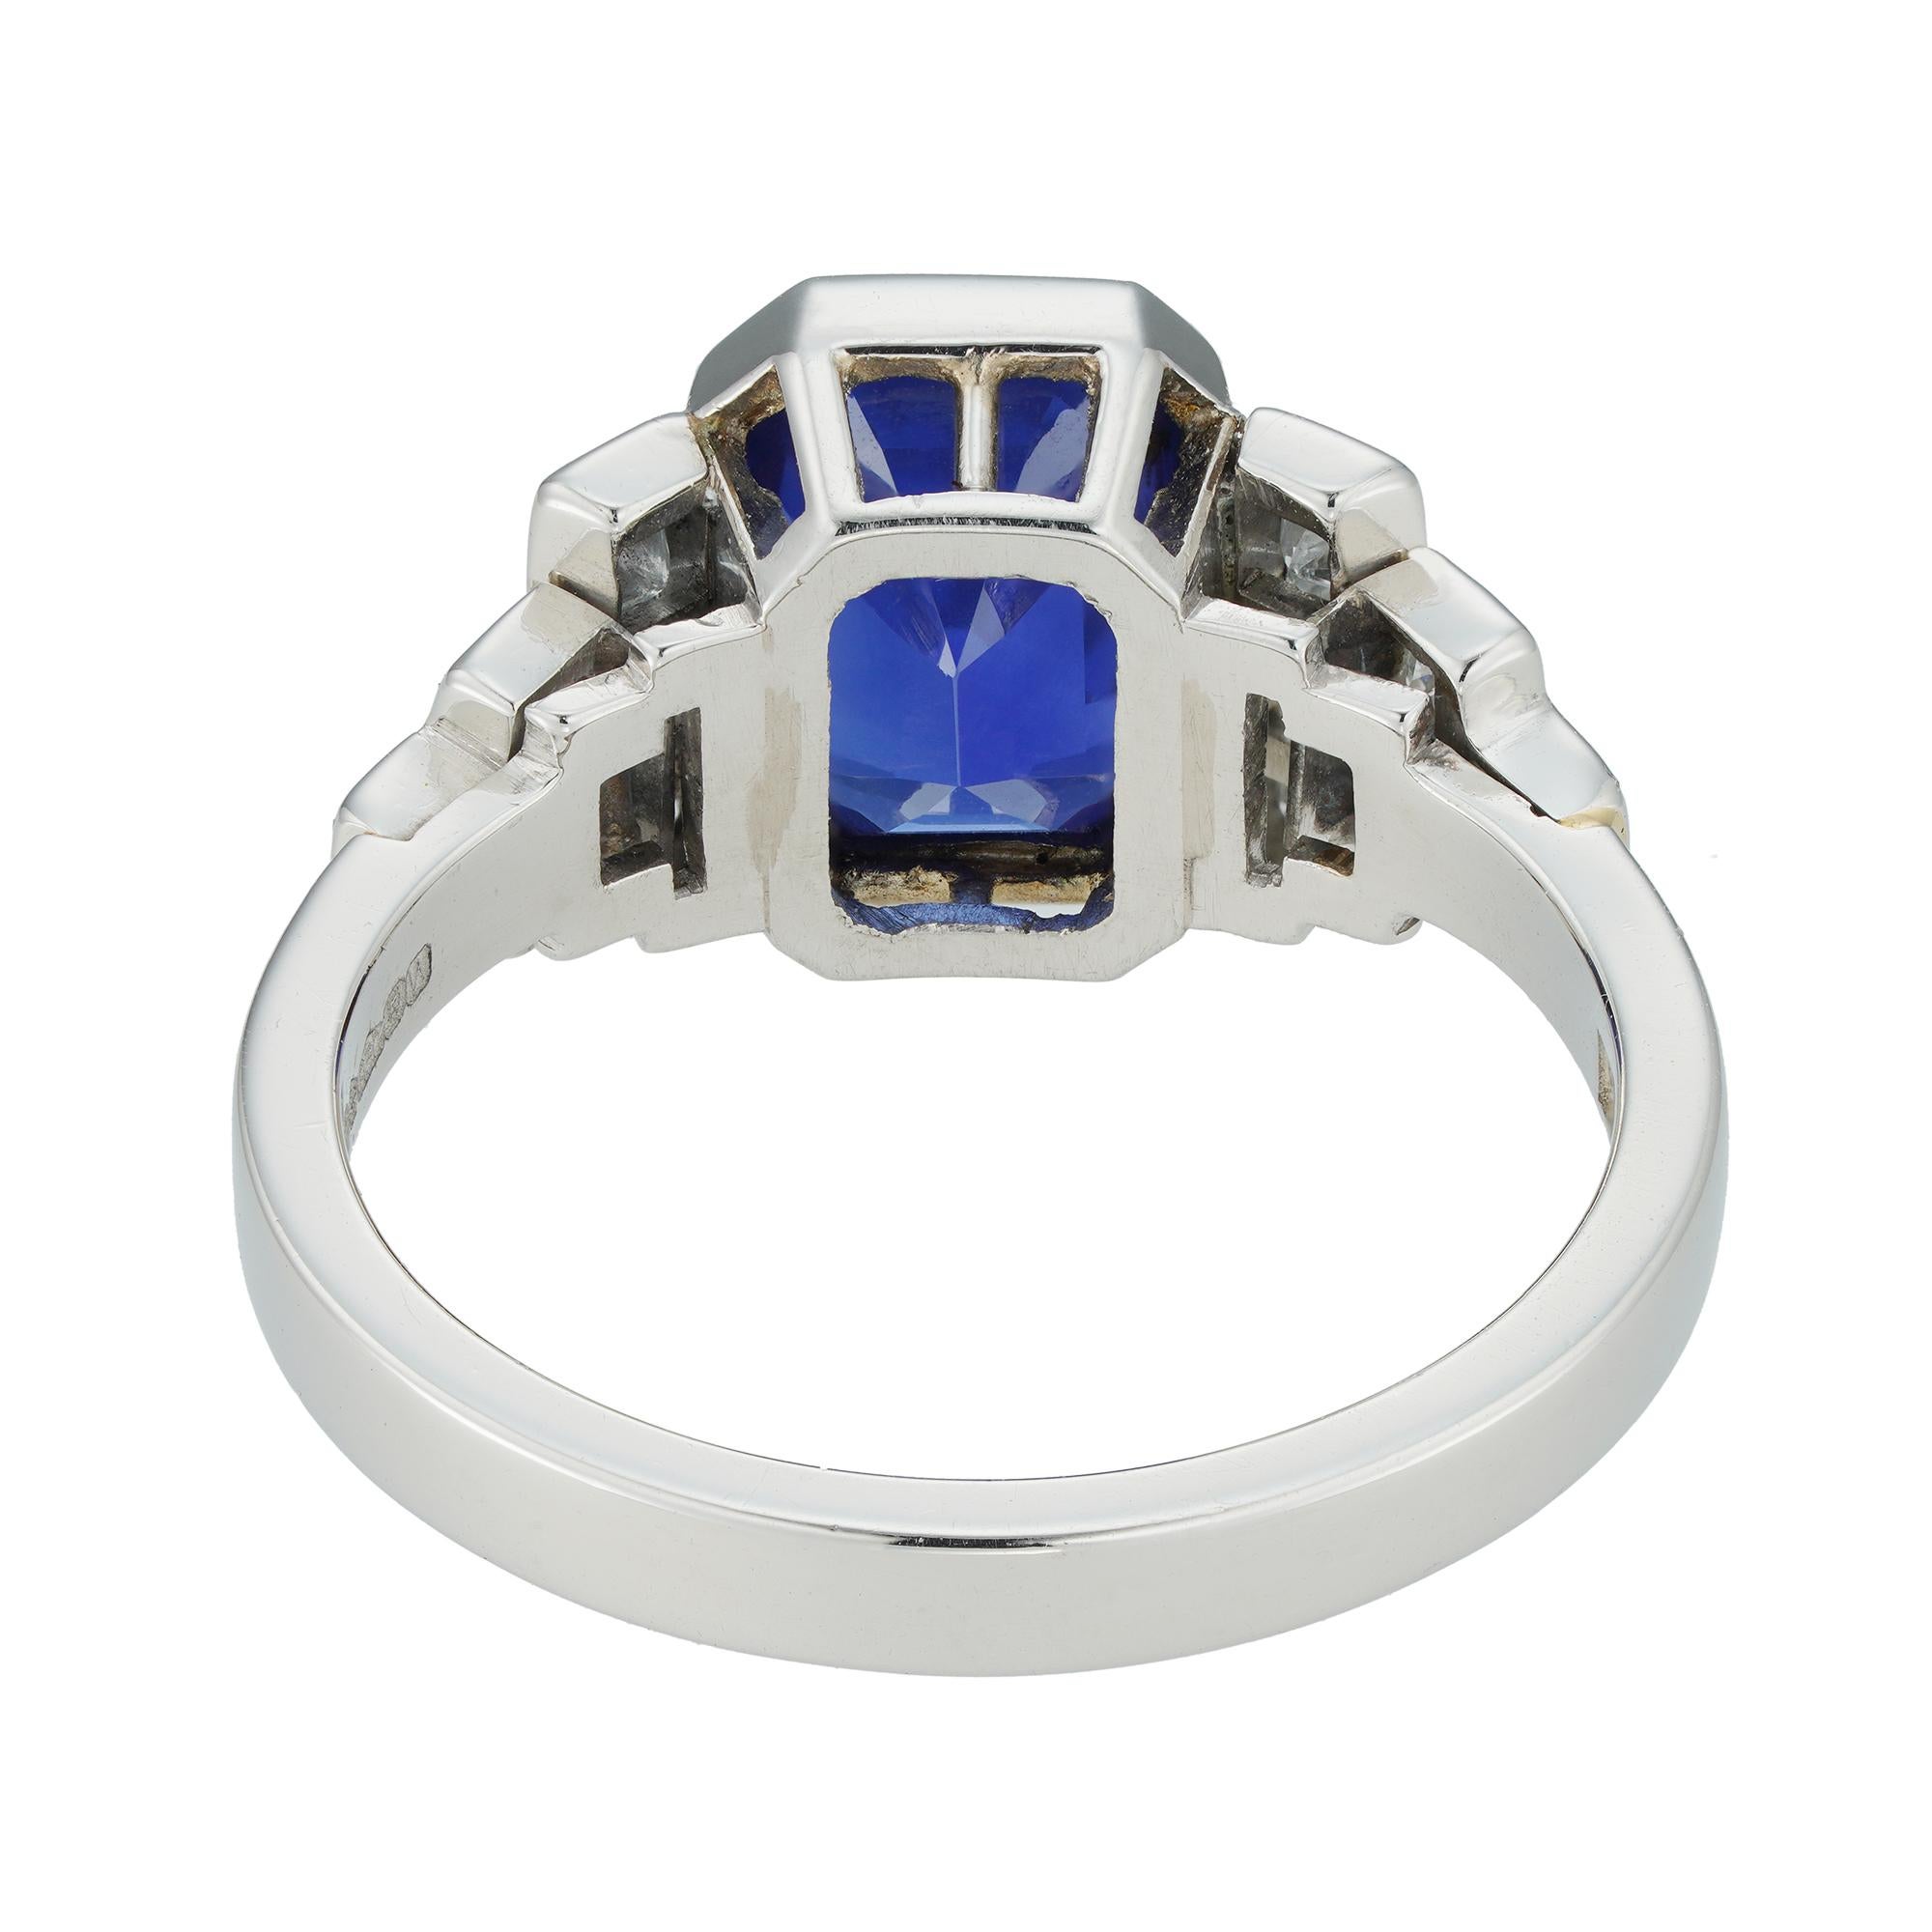 A sapphire and diamond ring, the octagonal-cut sapphire weighing 3.03 carats, rub-over set between three graduated stepped shoulders on each side, set with twelve princess-cut diamonds estimated to weigh 0.4 carats in total, all mounted in platinum,